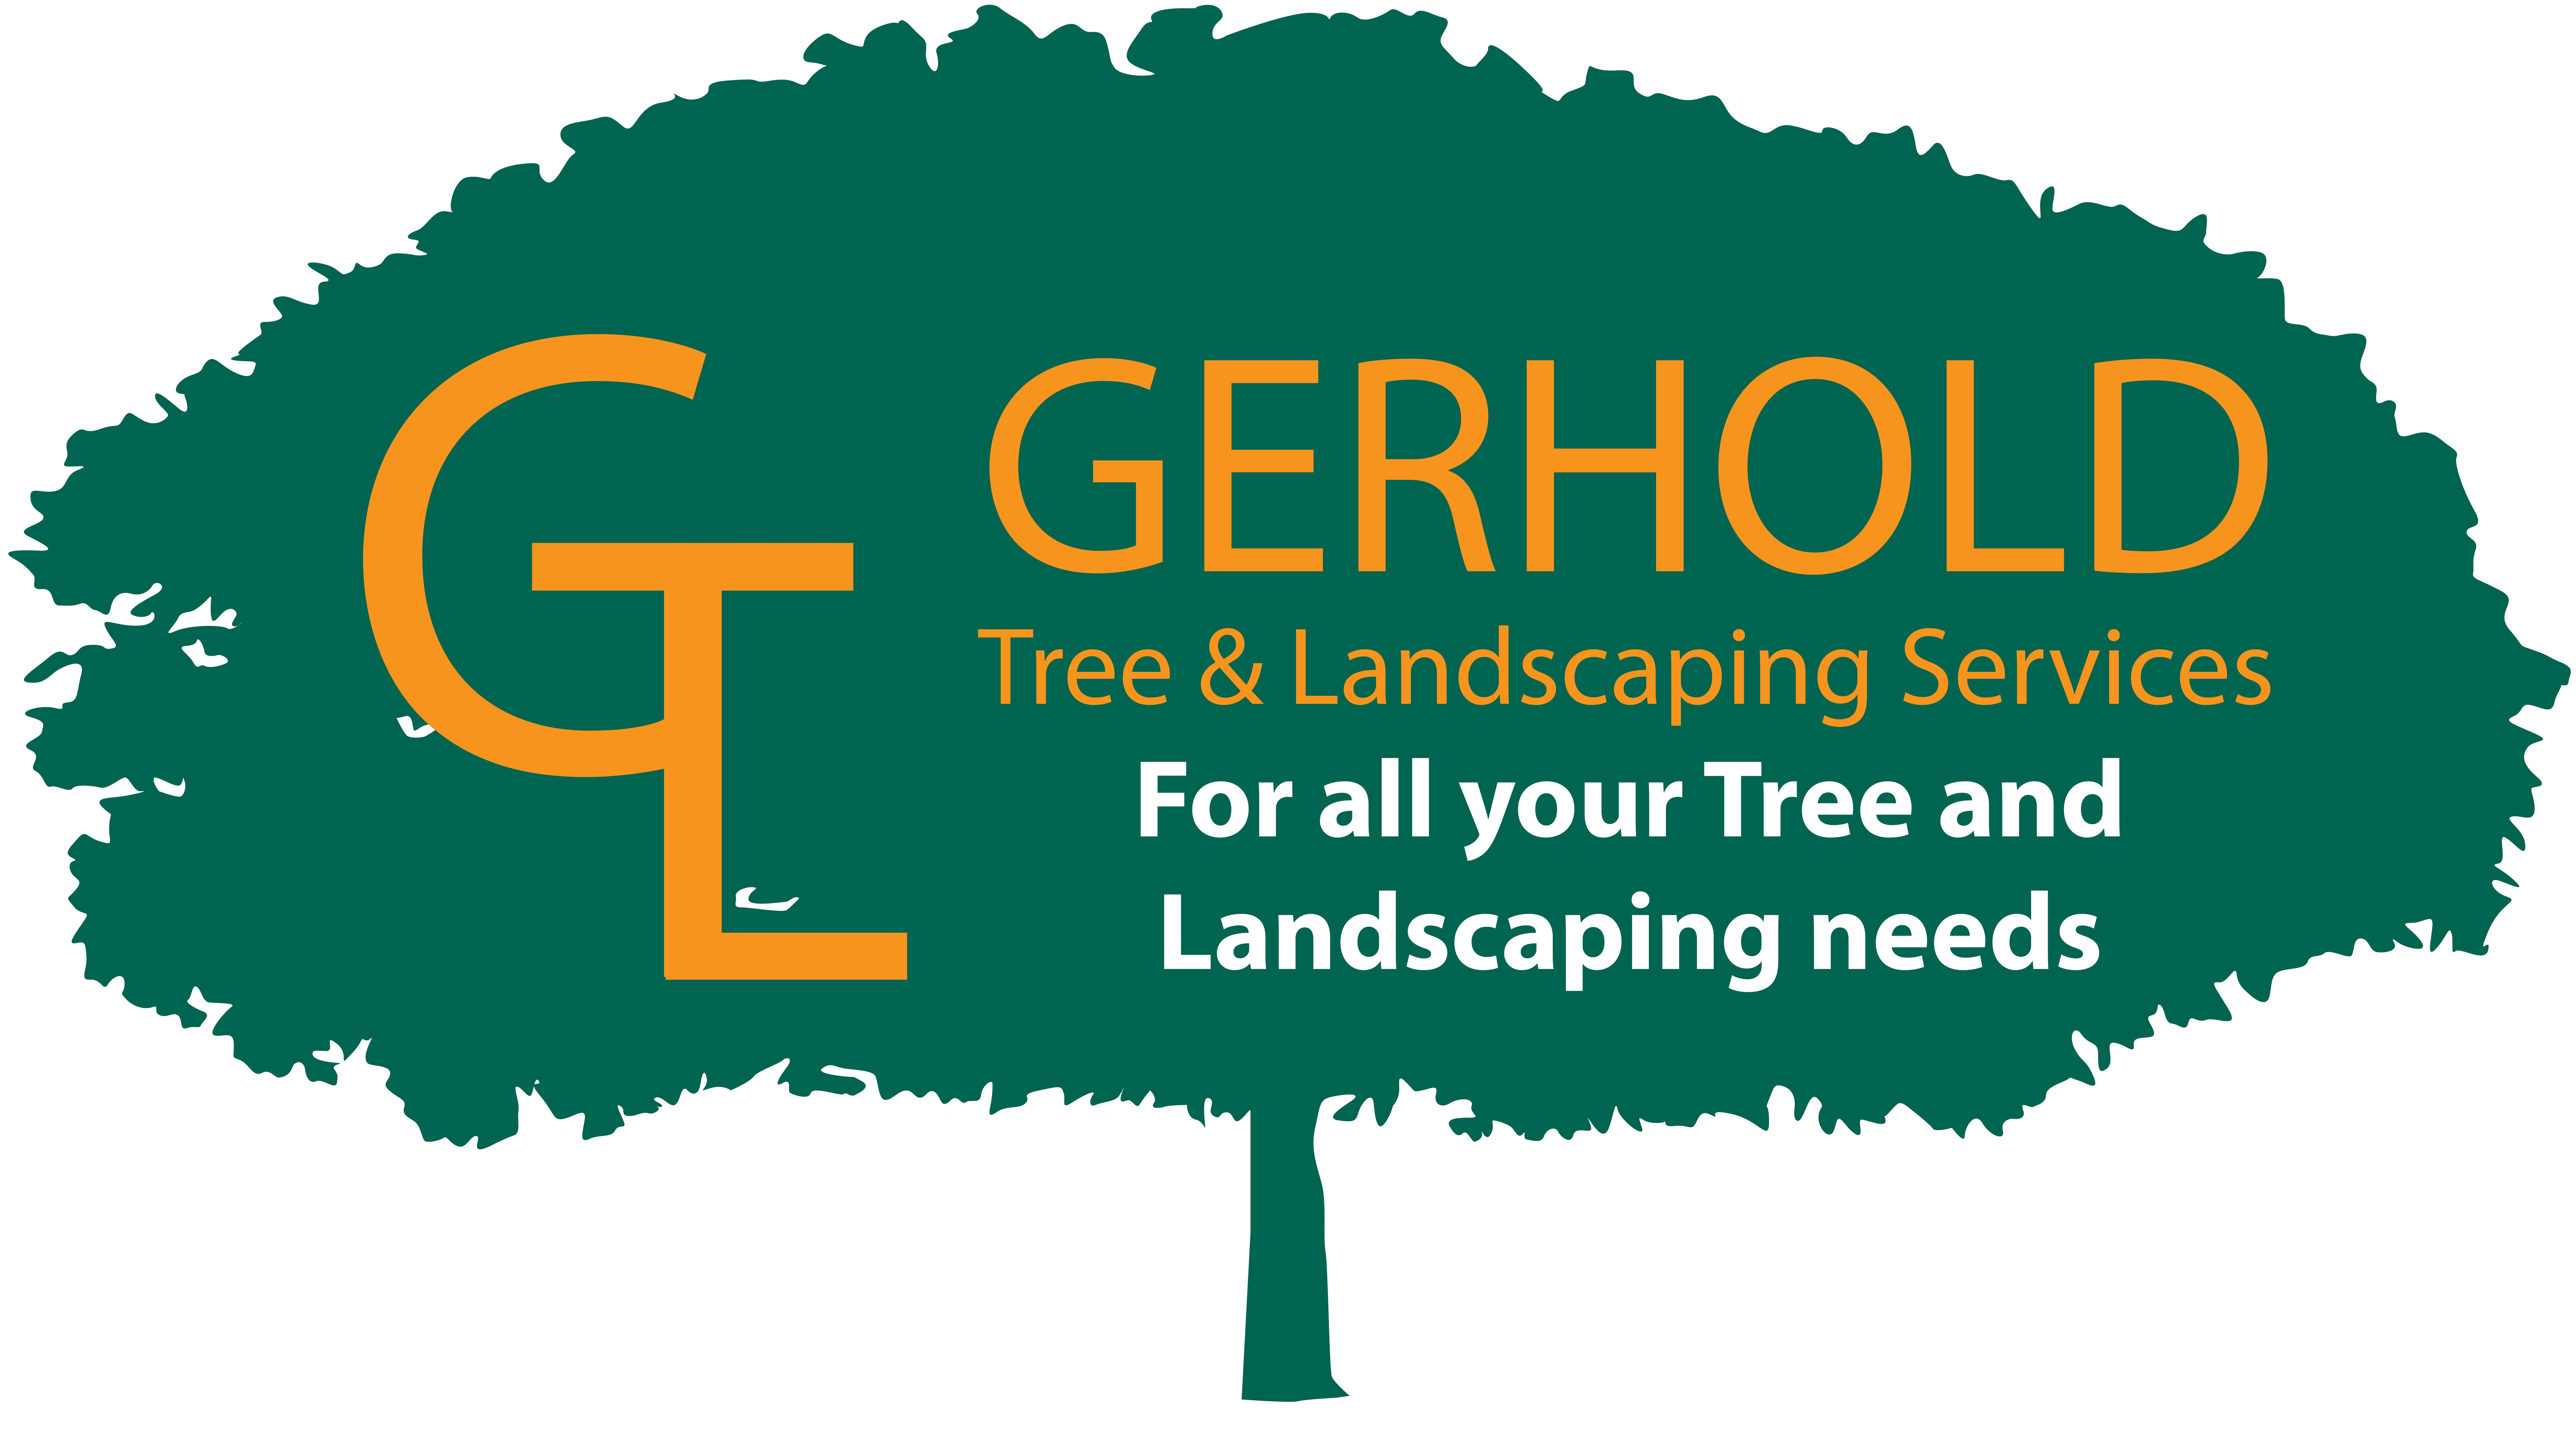 Gerhold Tree and Landscaping